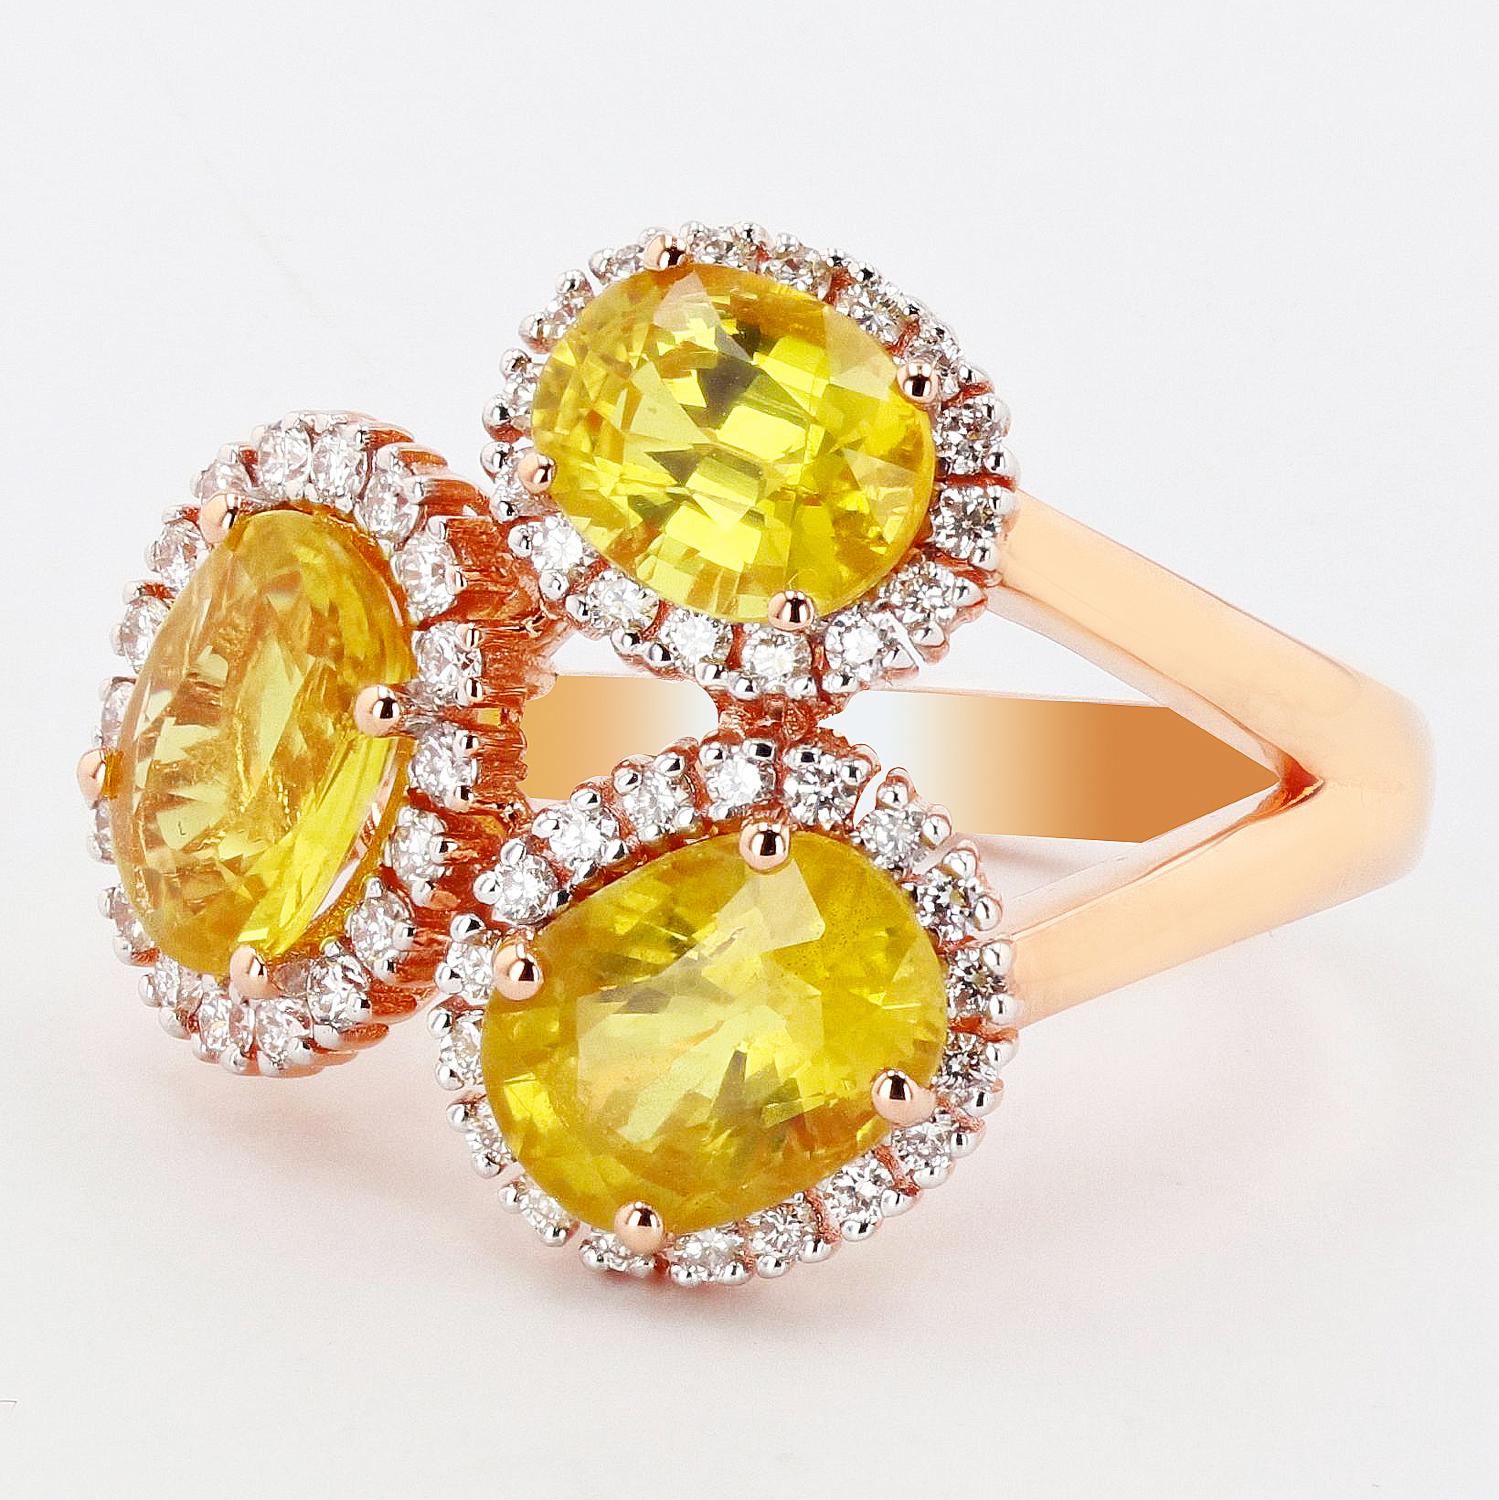 One electronically tested 18KT rose gold cast yellow sapphire & diamond ring. 

Each of the featured sapphires are set within a diamond bezel, supported by a ribbed under gallery, completed by a two millimeter wide band. Bright polish finish.